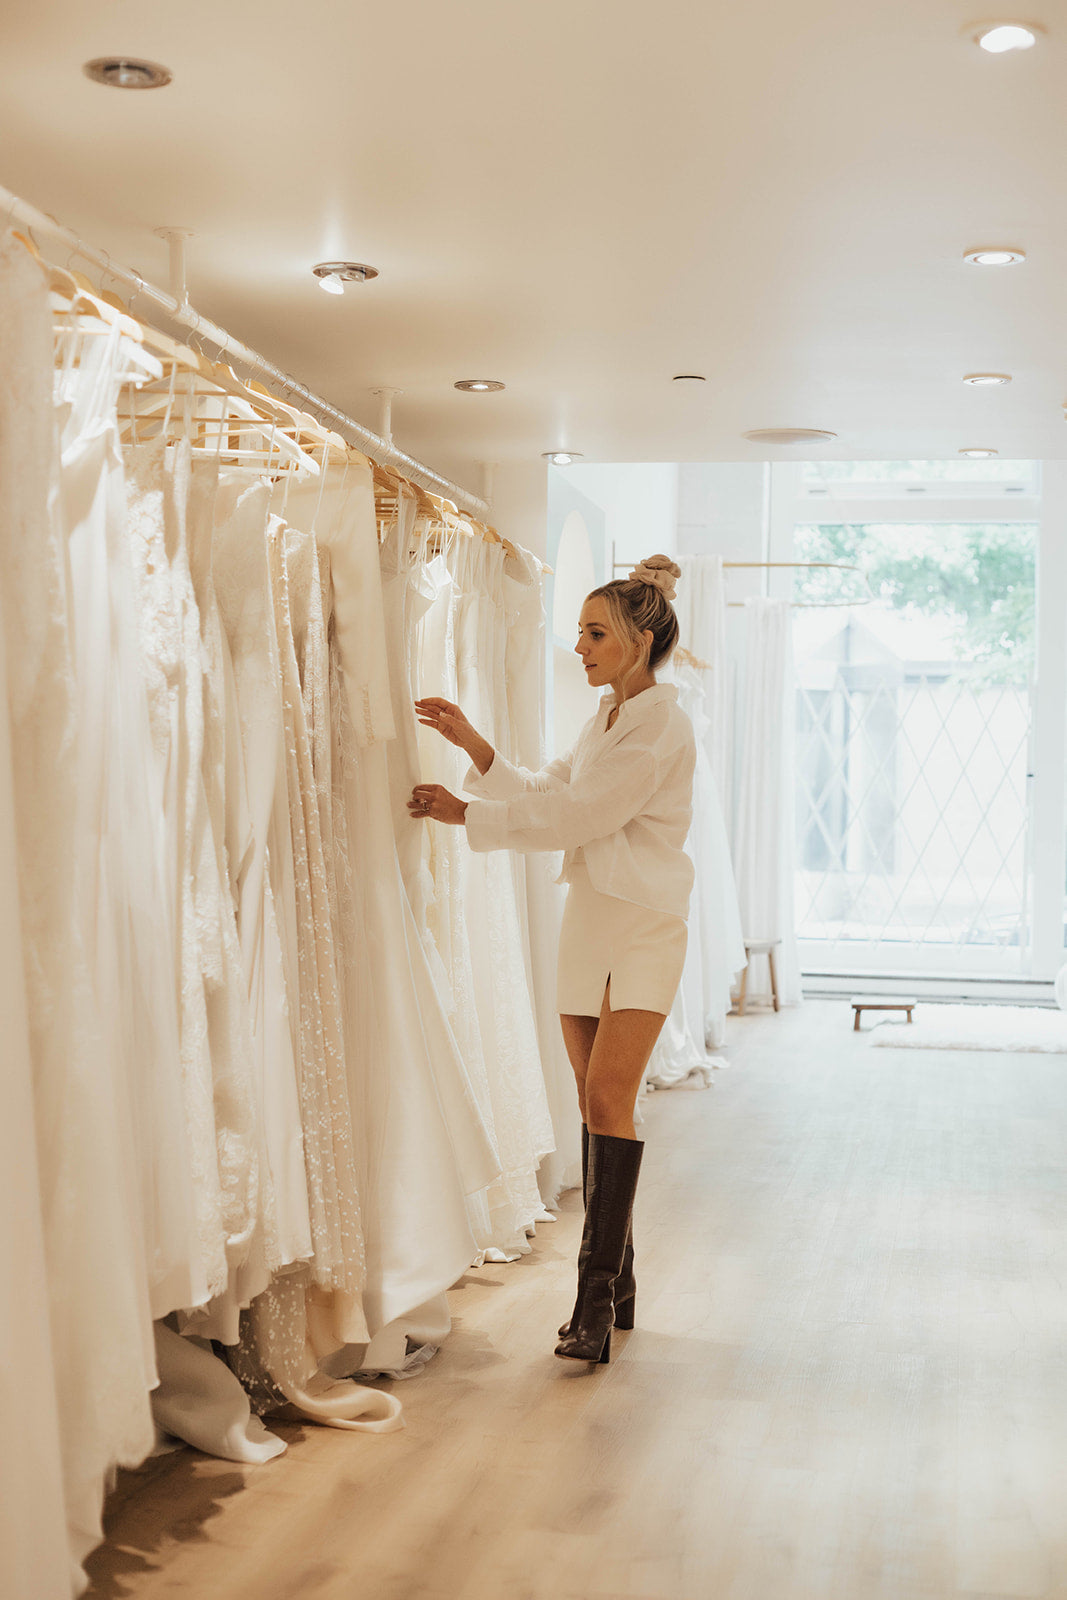 Rituals of Love Bridal boutique is located in Gastown and is appointment only. We have a curated collection of wedding dresses and bridal gowns, as well as a bridal veils, accessories and jewelry.